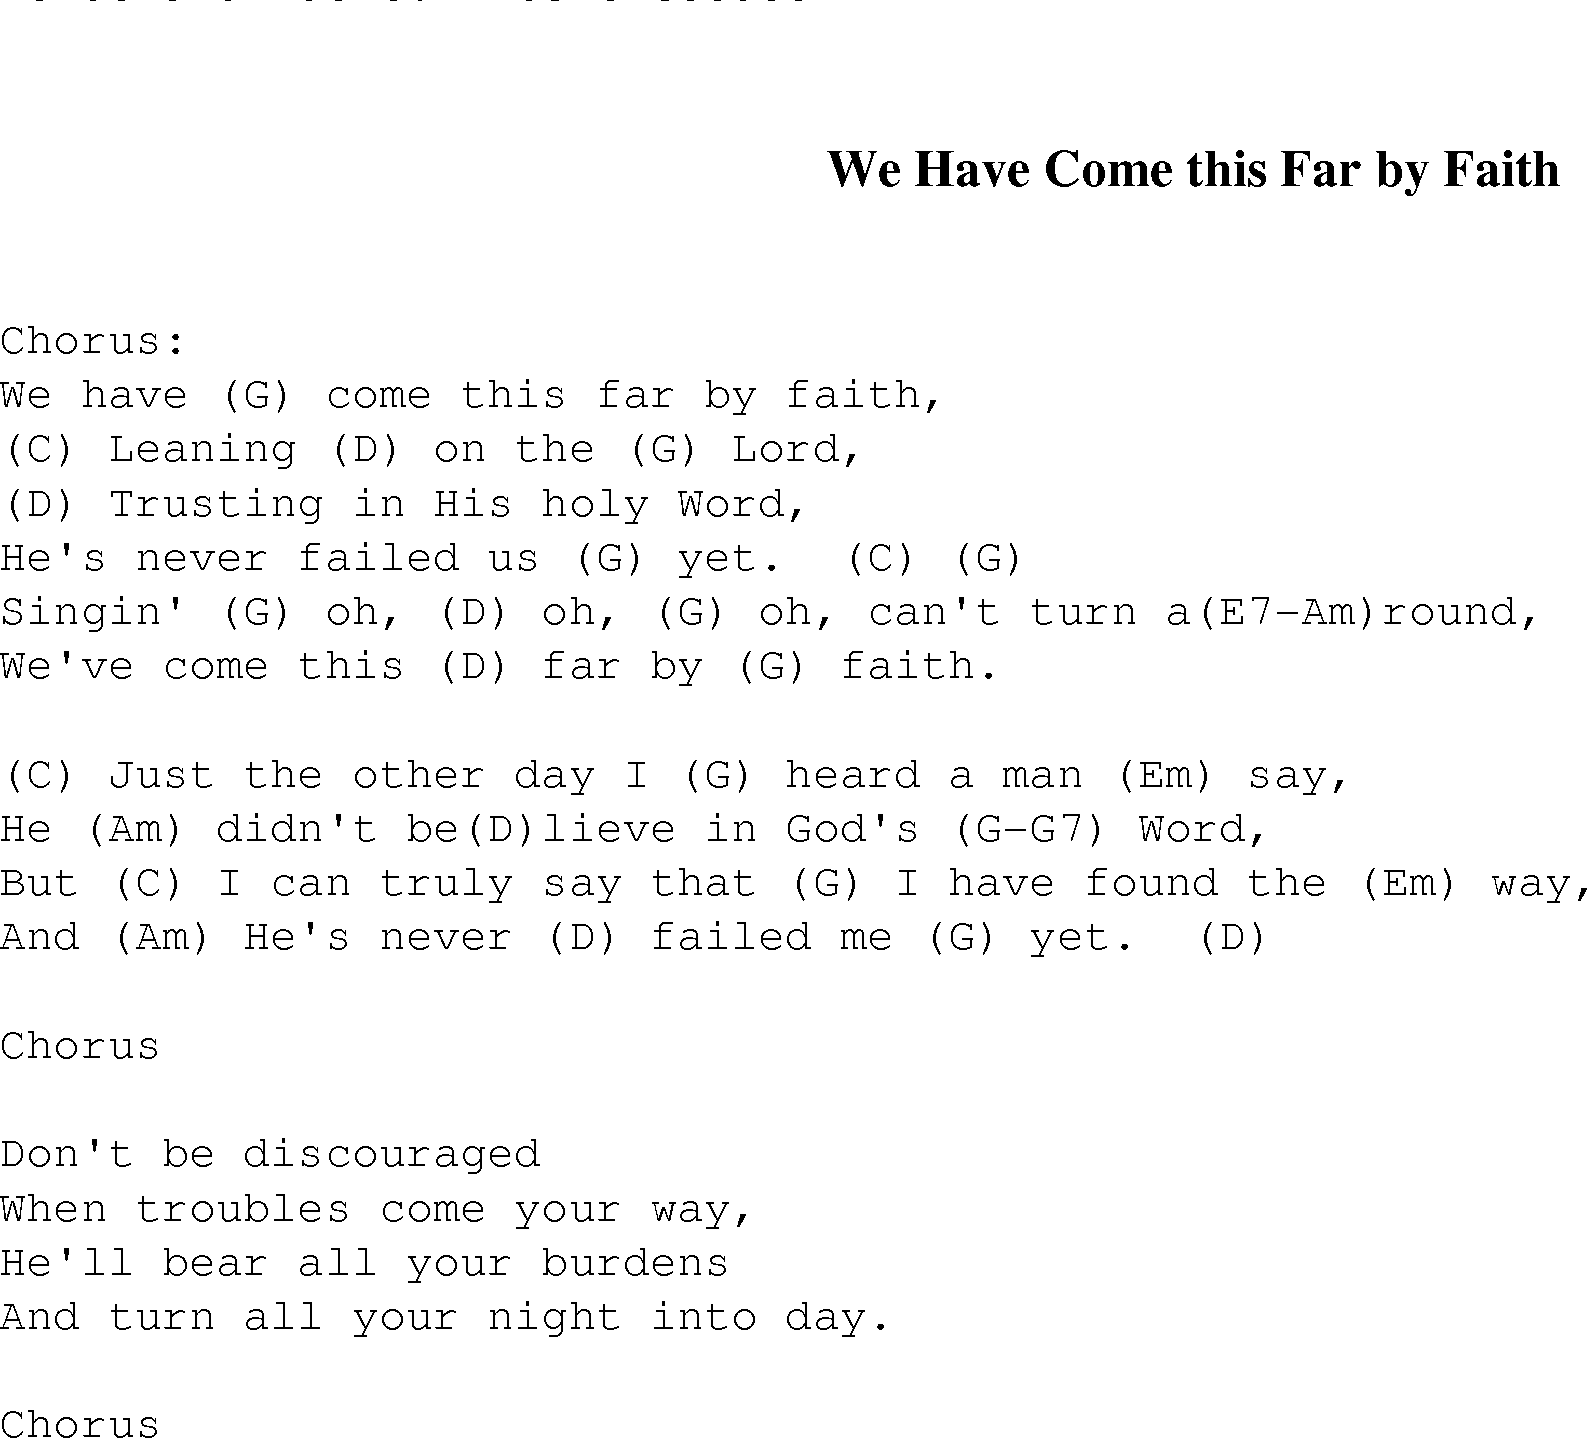 Gospel Song: we_have_come_this_far_by_faith, lyrics and chords.